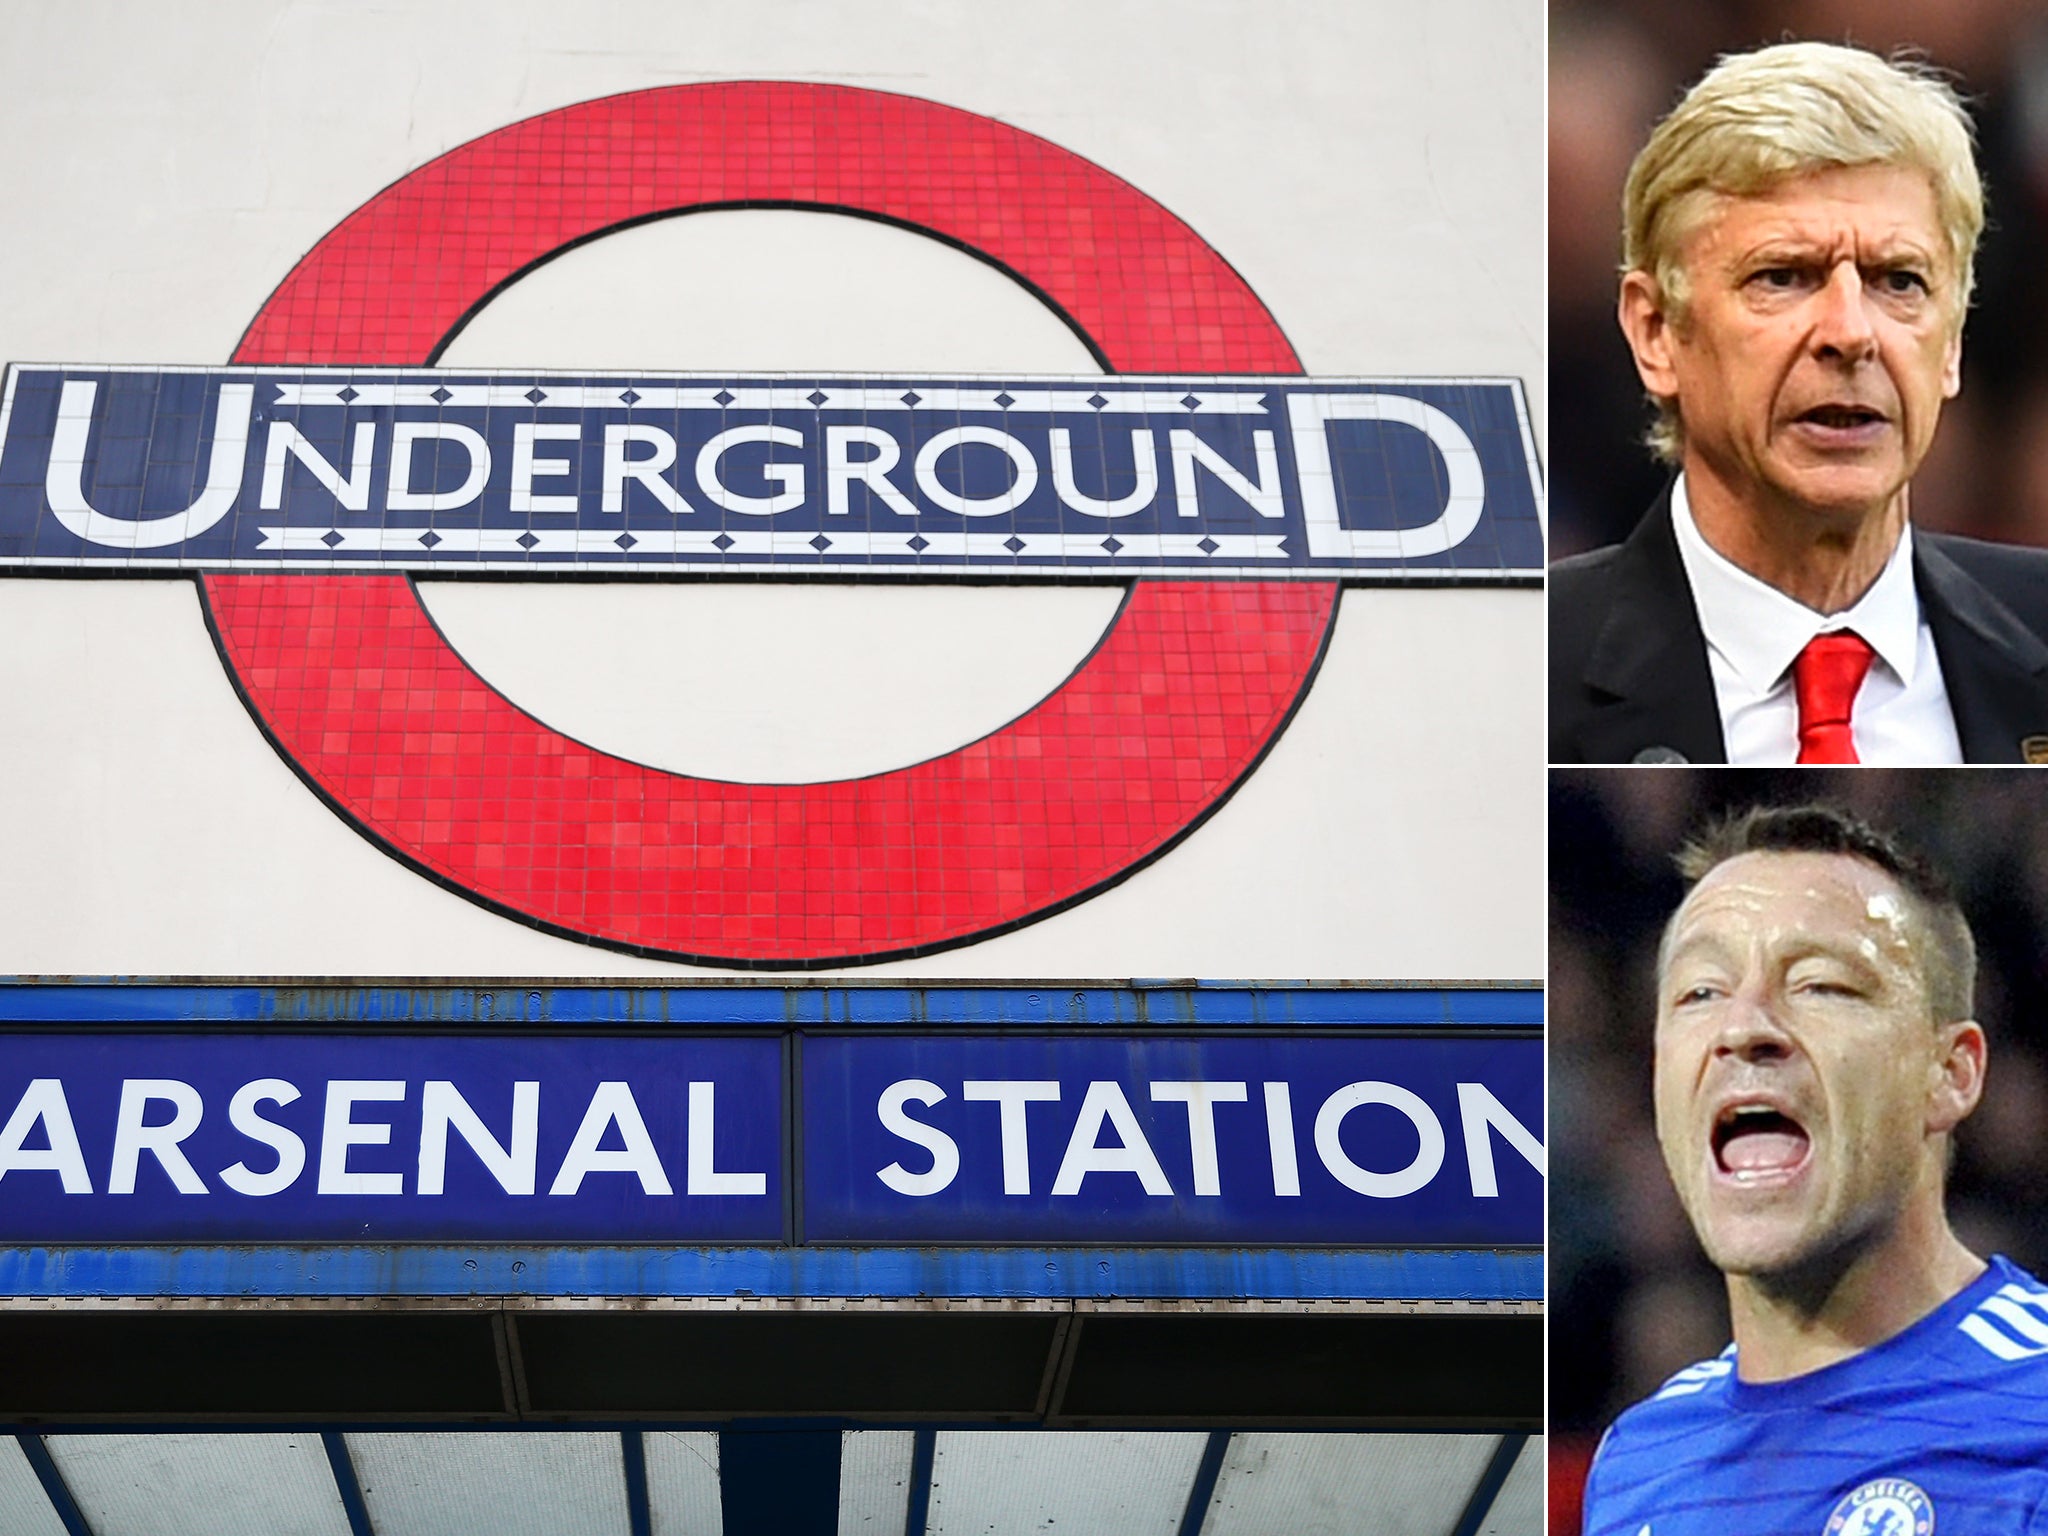 Arsenal station and Arsene Wenger and John Terry